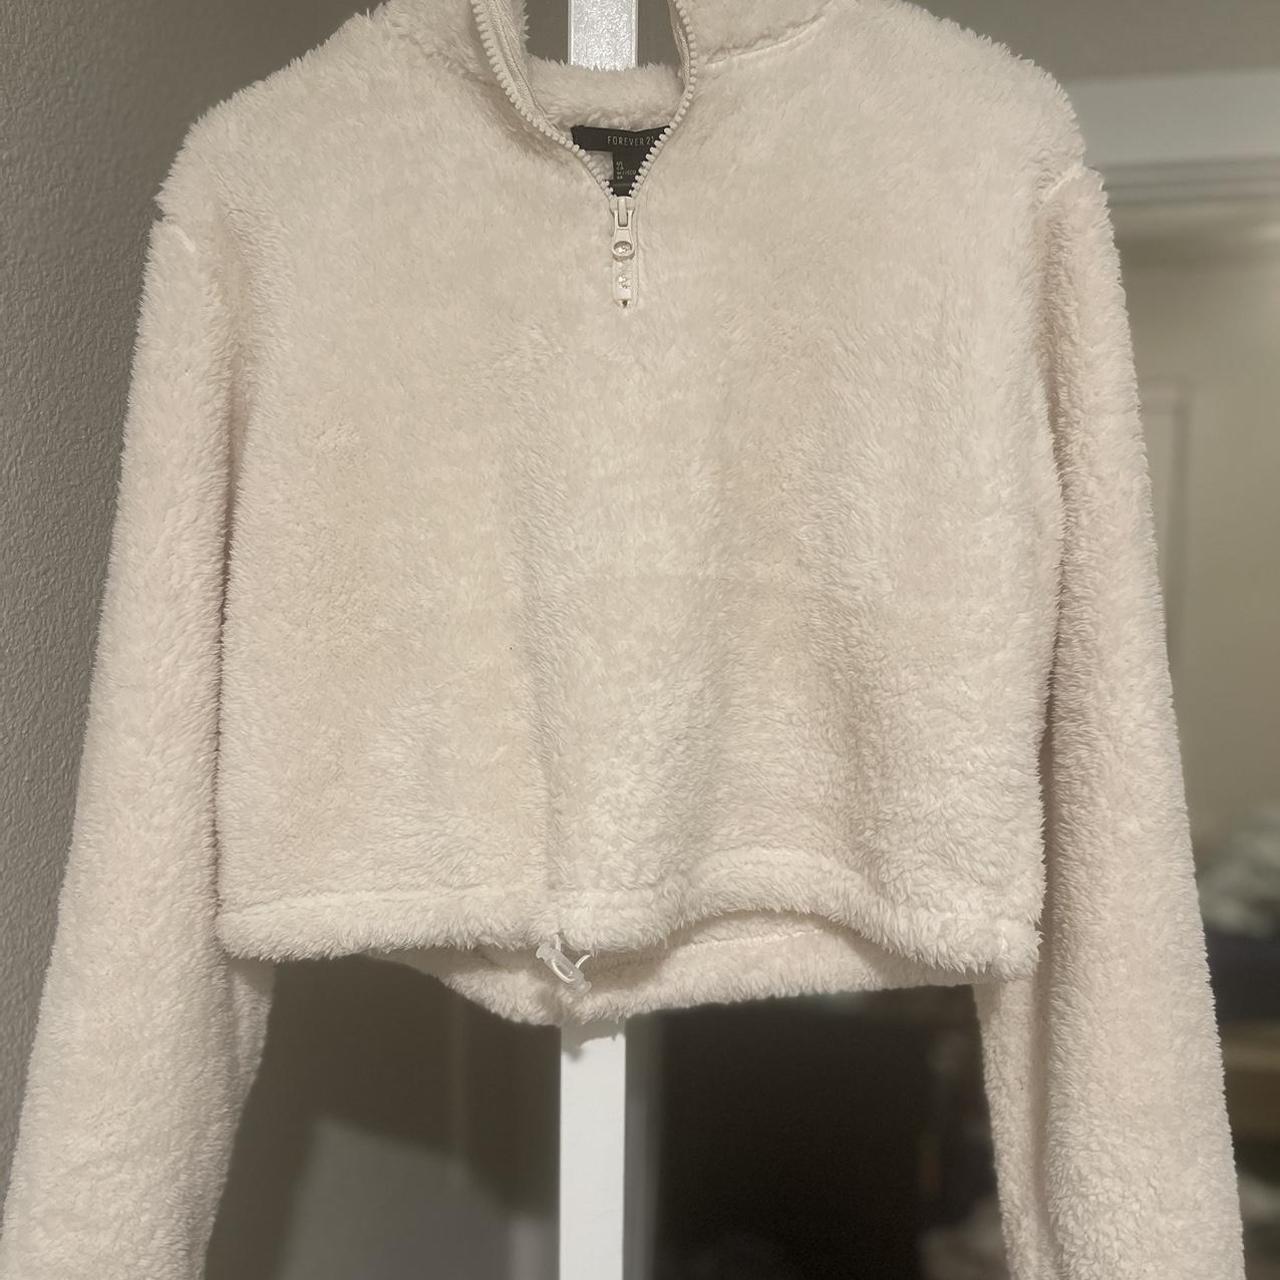 Cropped white sweater. Super comfortable and warm. - Depop